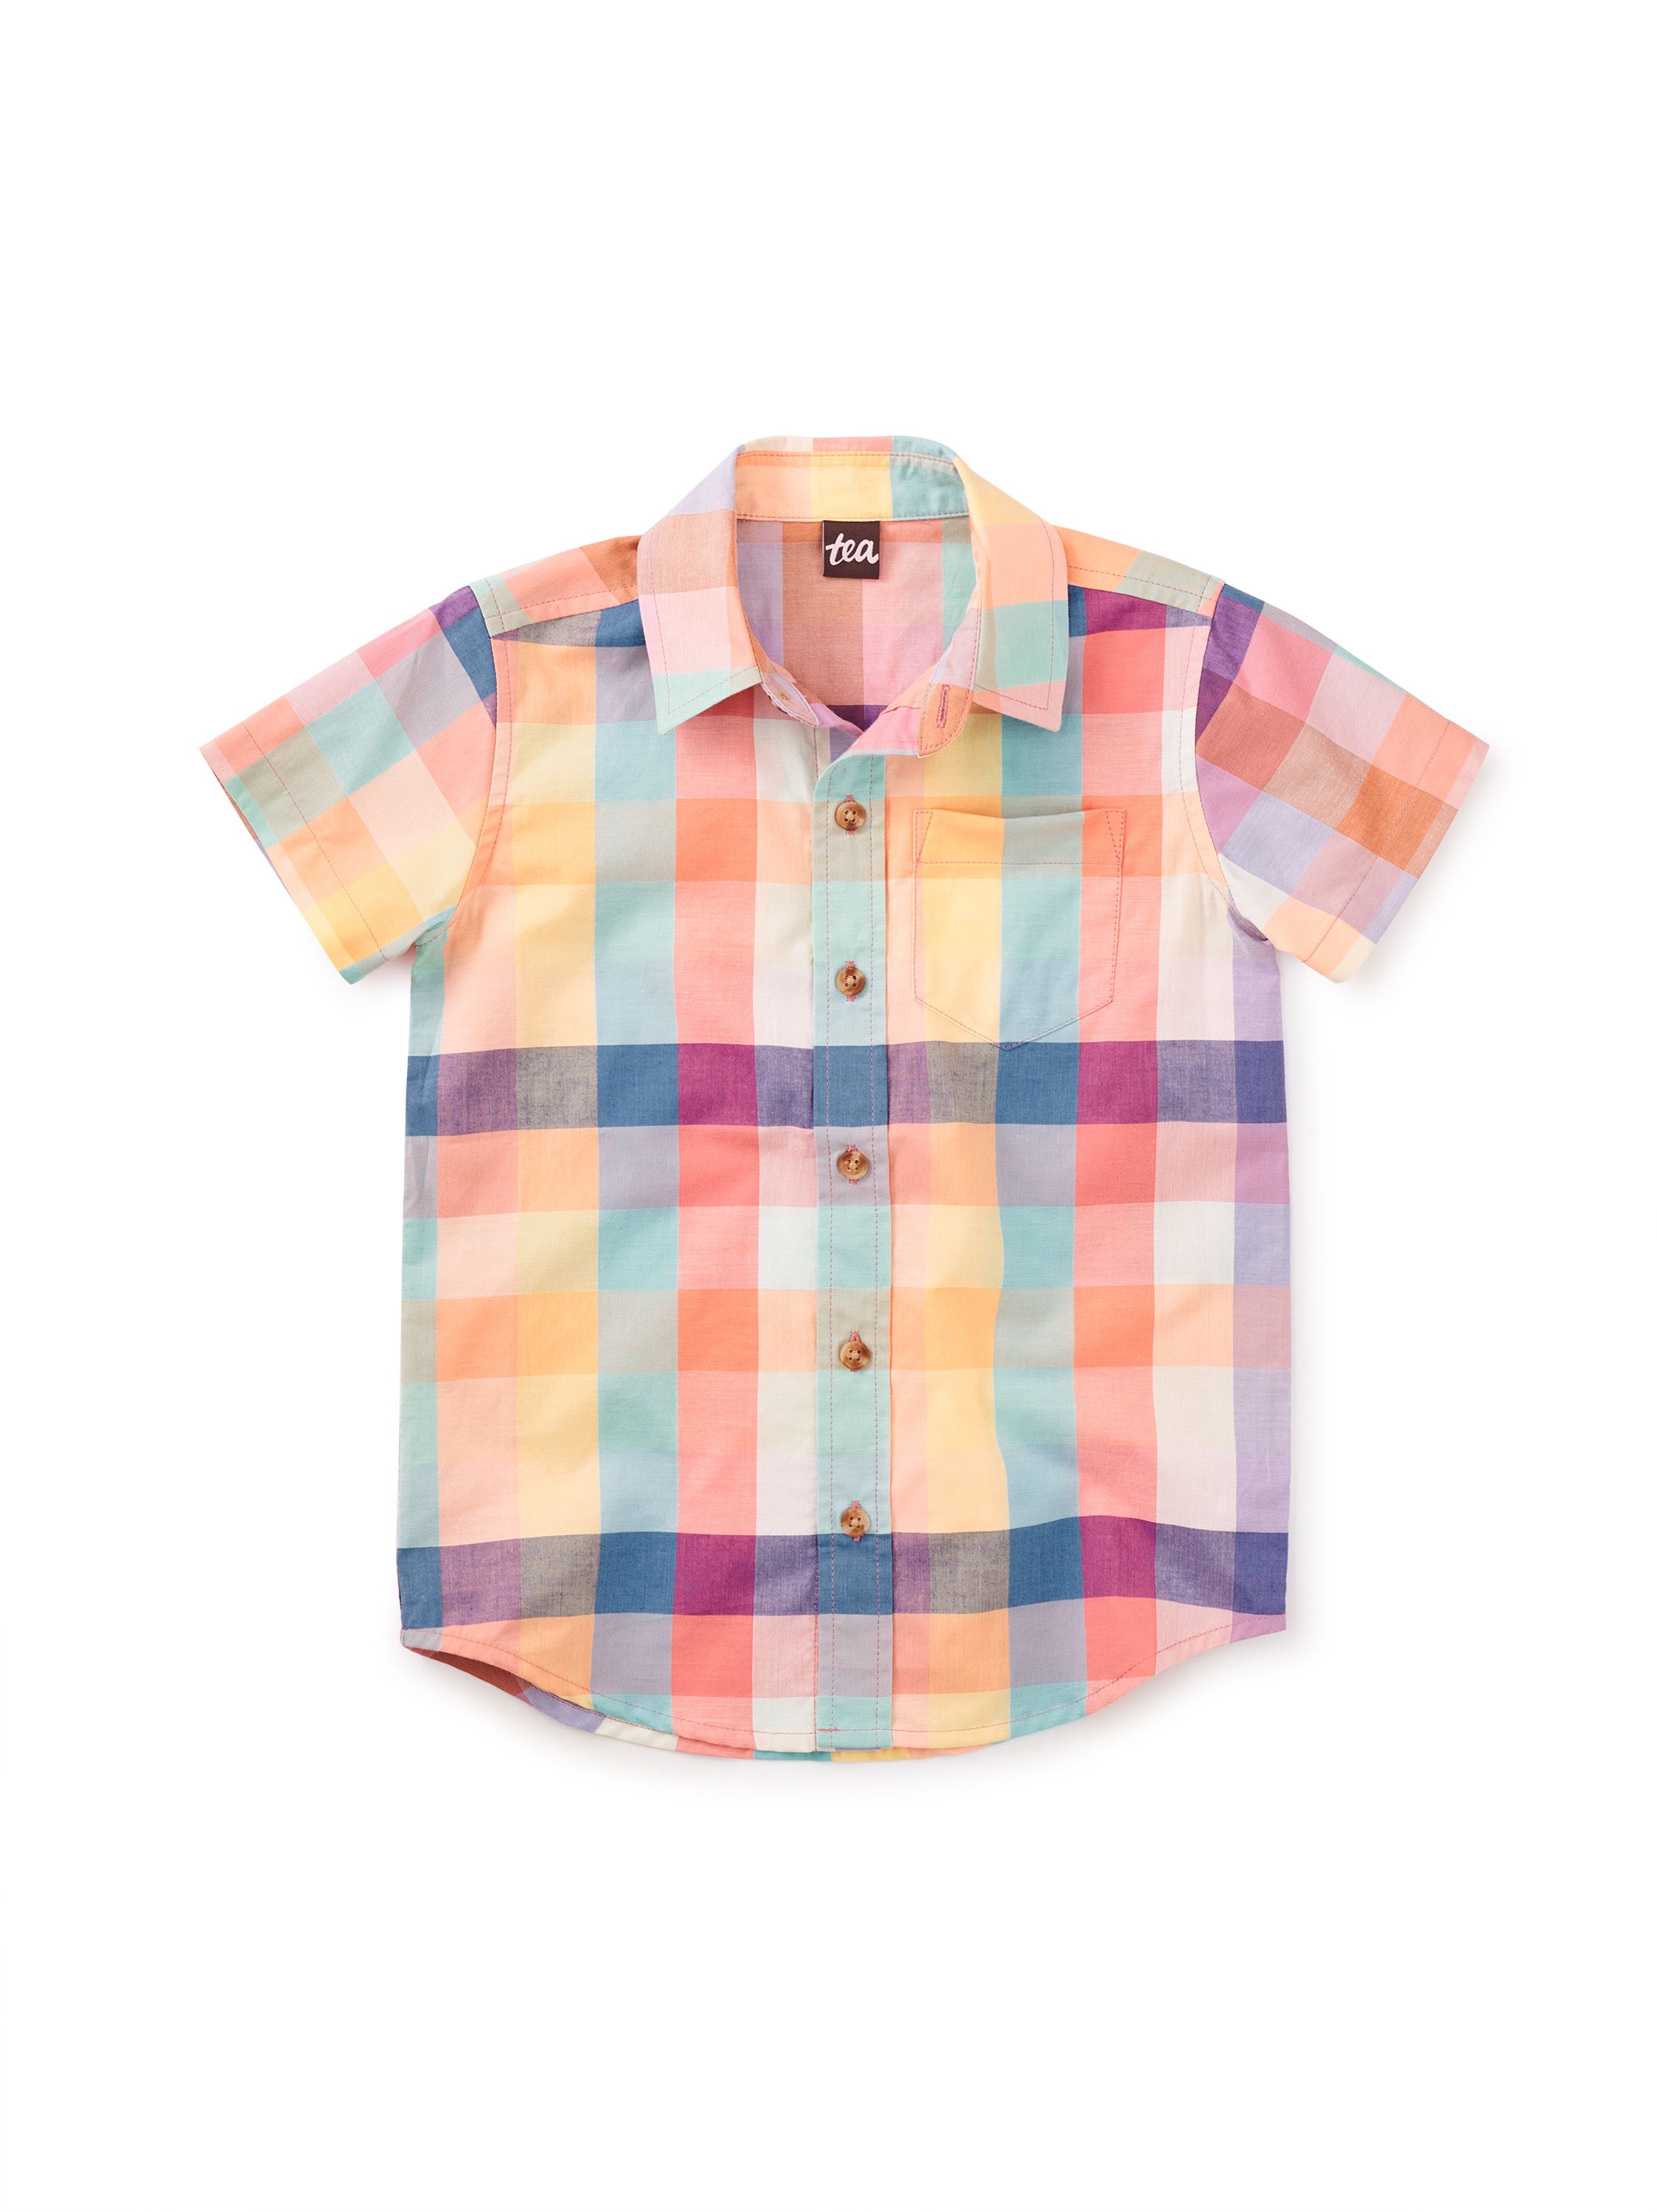 Great button down and I love the feel of it | Tea Collection